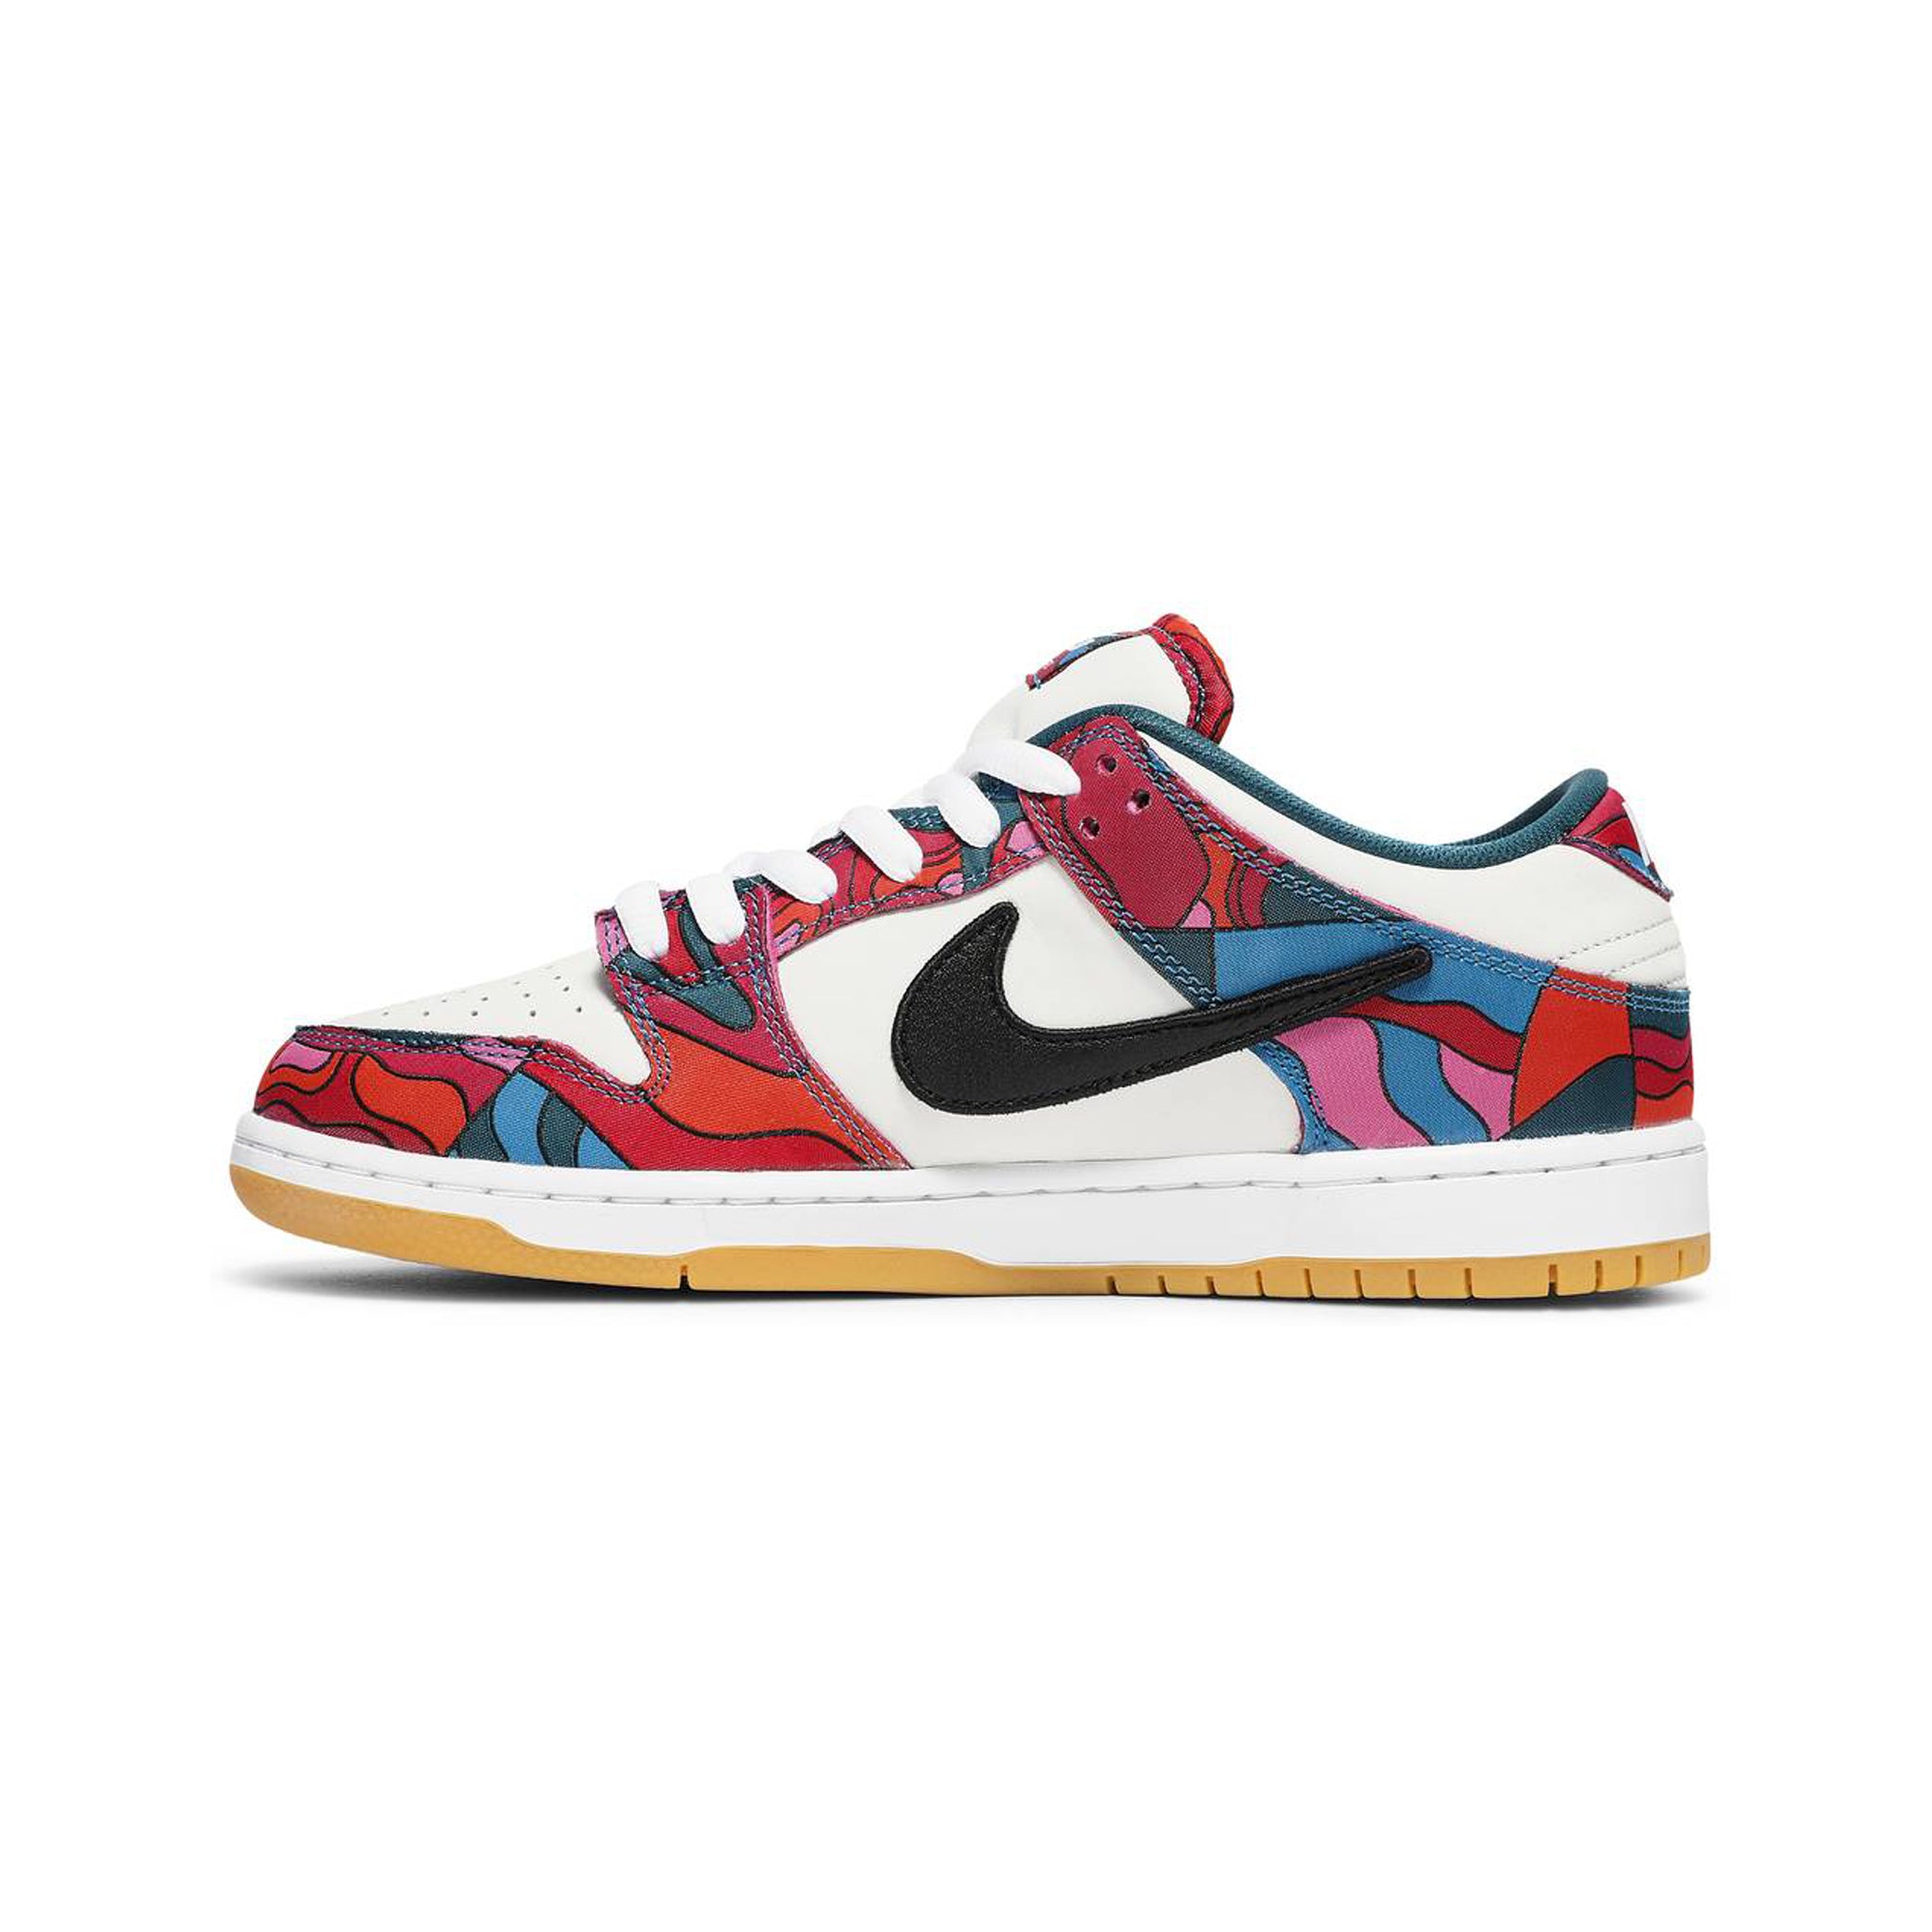 NIKE SB DUNK LOW PRO PARRA ABSTRACT ART (2021)